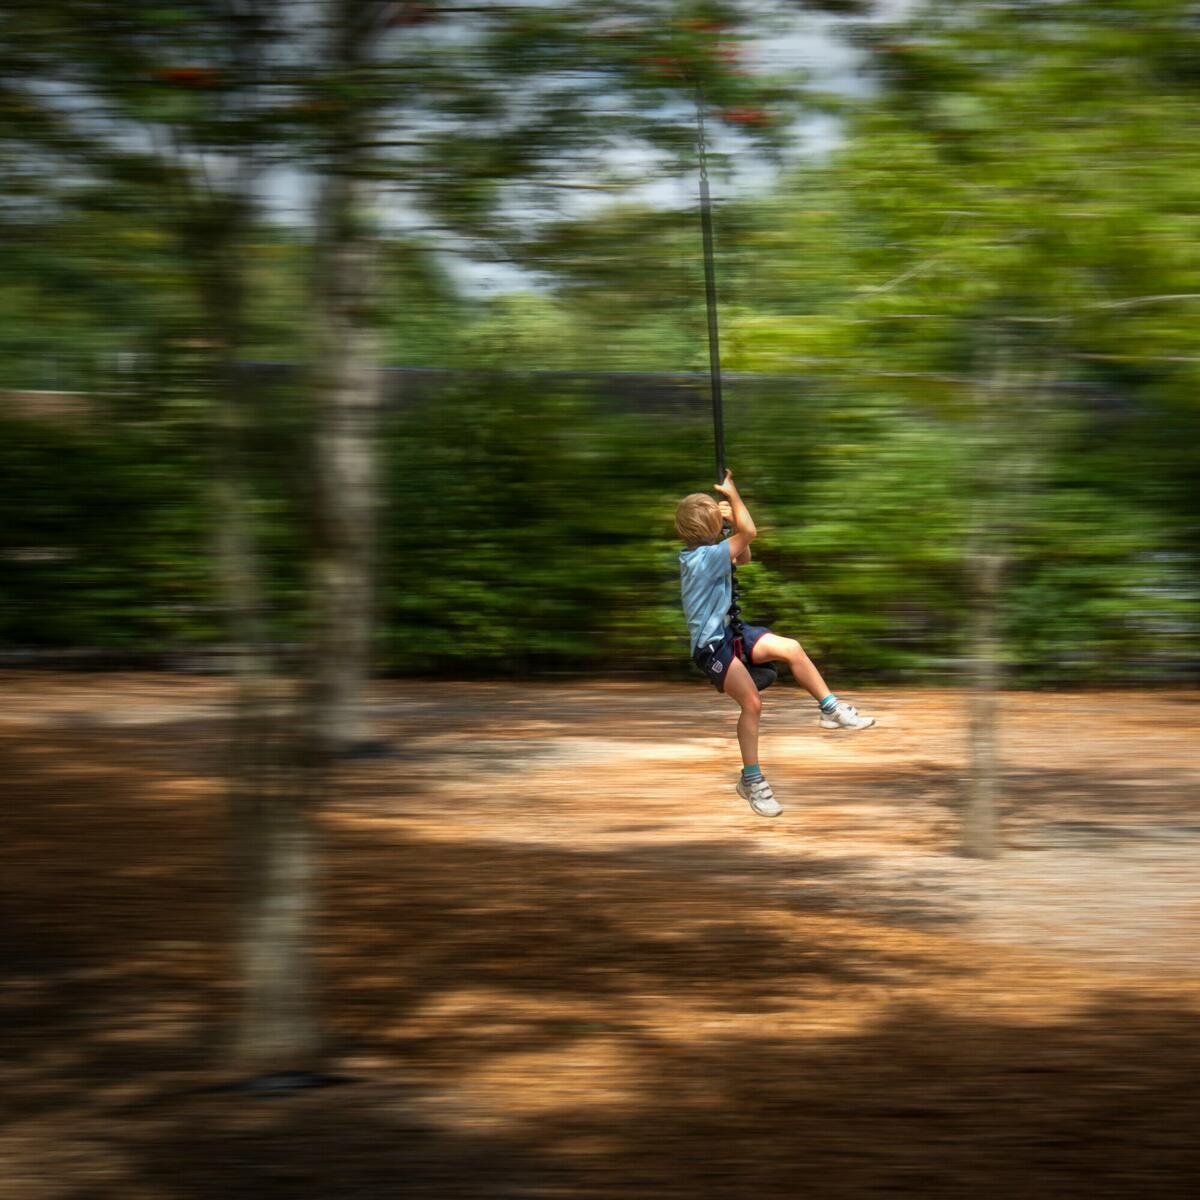 The need for speed - zip wire fun at Pearl Lake